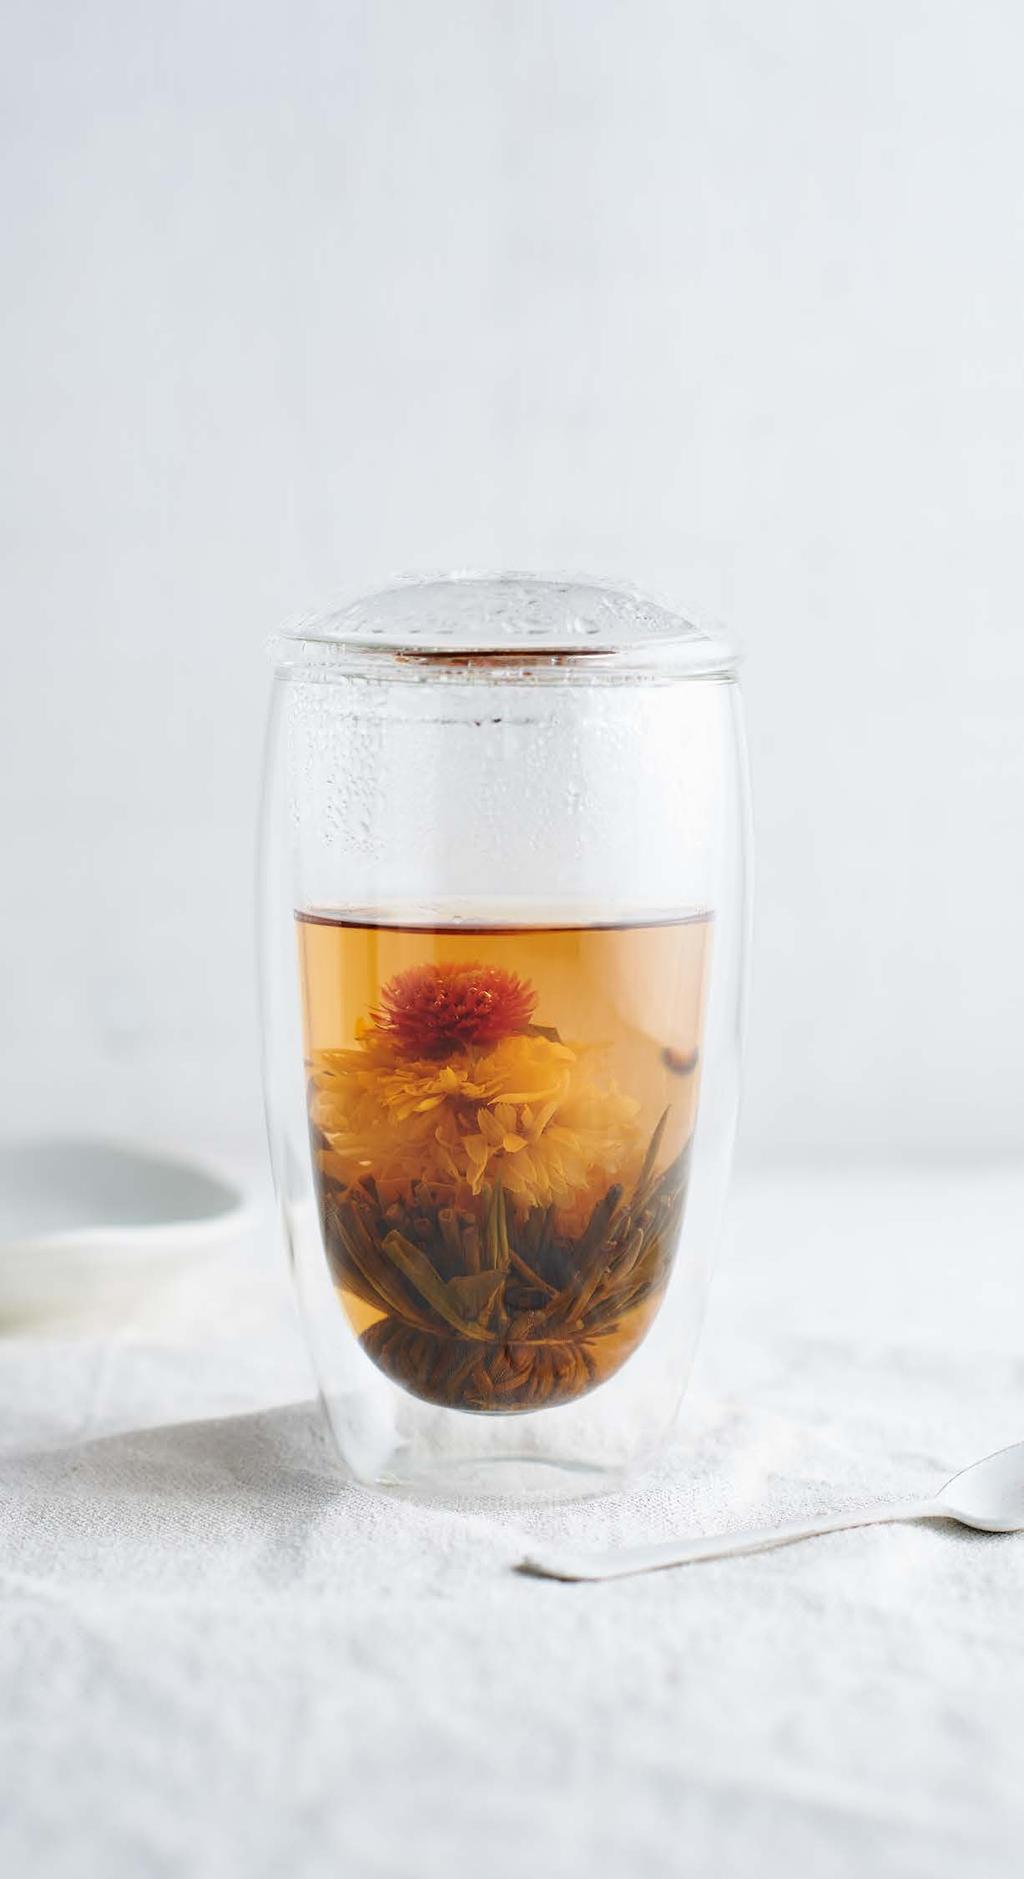 HOT AND ICE TEAS 養生熱茶及冰茶 HT1 步步高升花茶 Globe amaranth and jasmine flower tea bulb Teas can prevent diseases, help in weight loss, increase energy and boost one s thinking power HT1 HT2 HT3 HT4 HT5 HT6